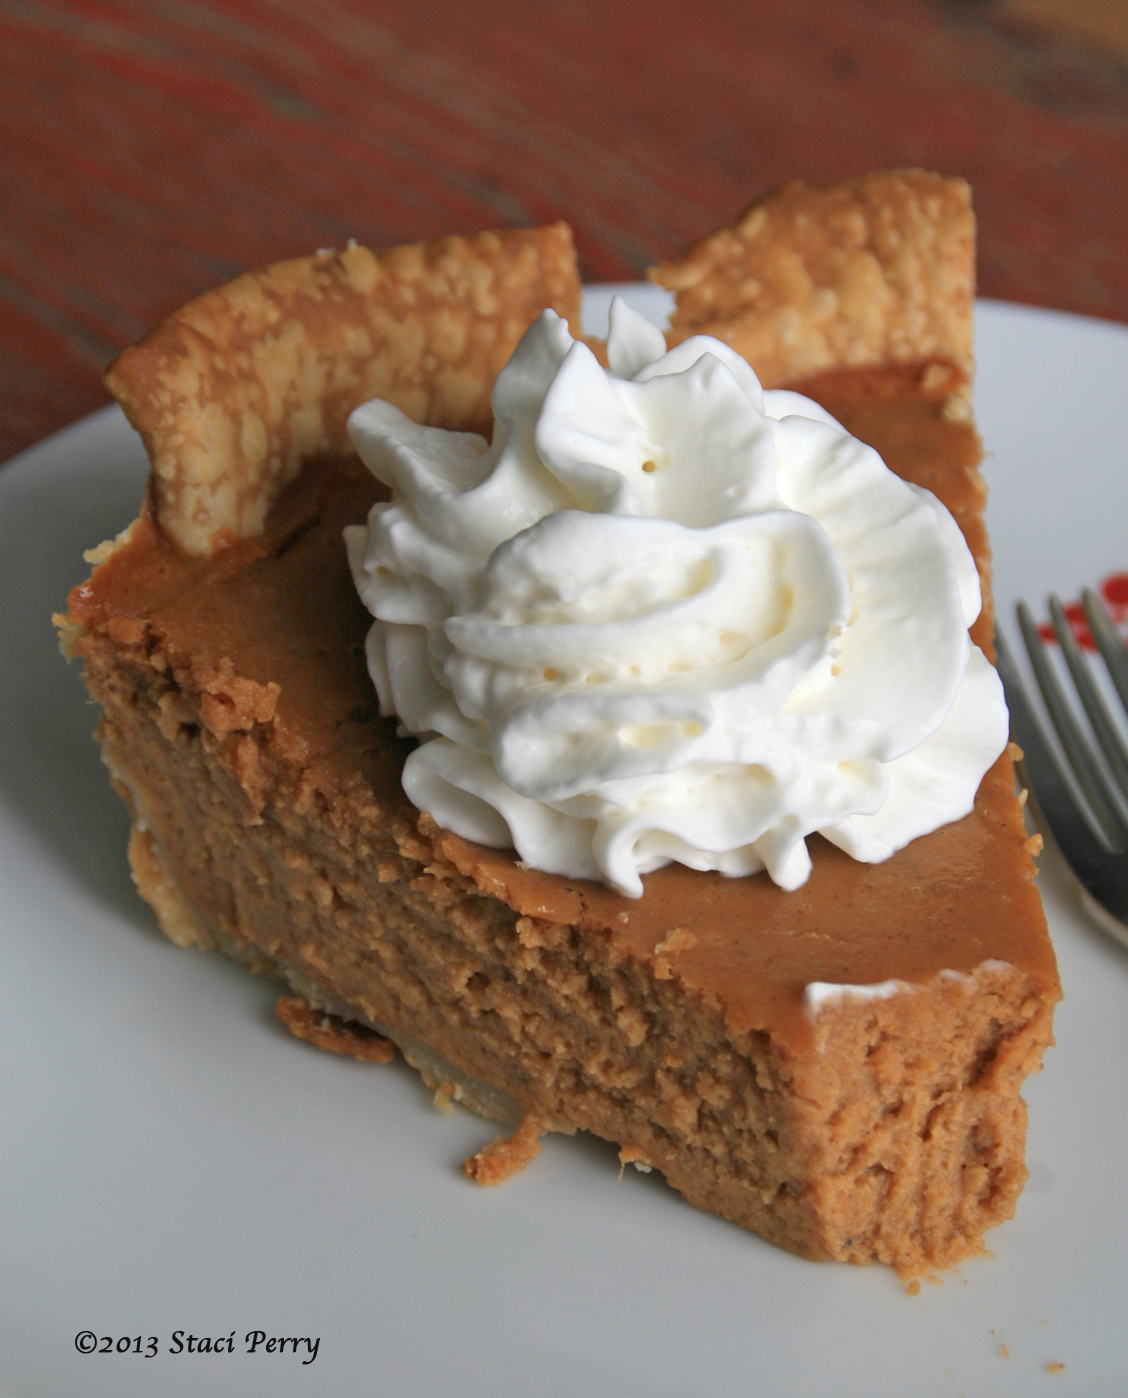 You Don’t Need My Recipe, Just Bake a Pumpkin Pie